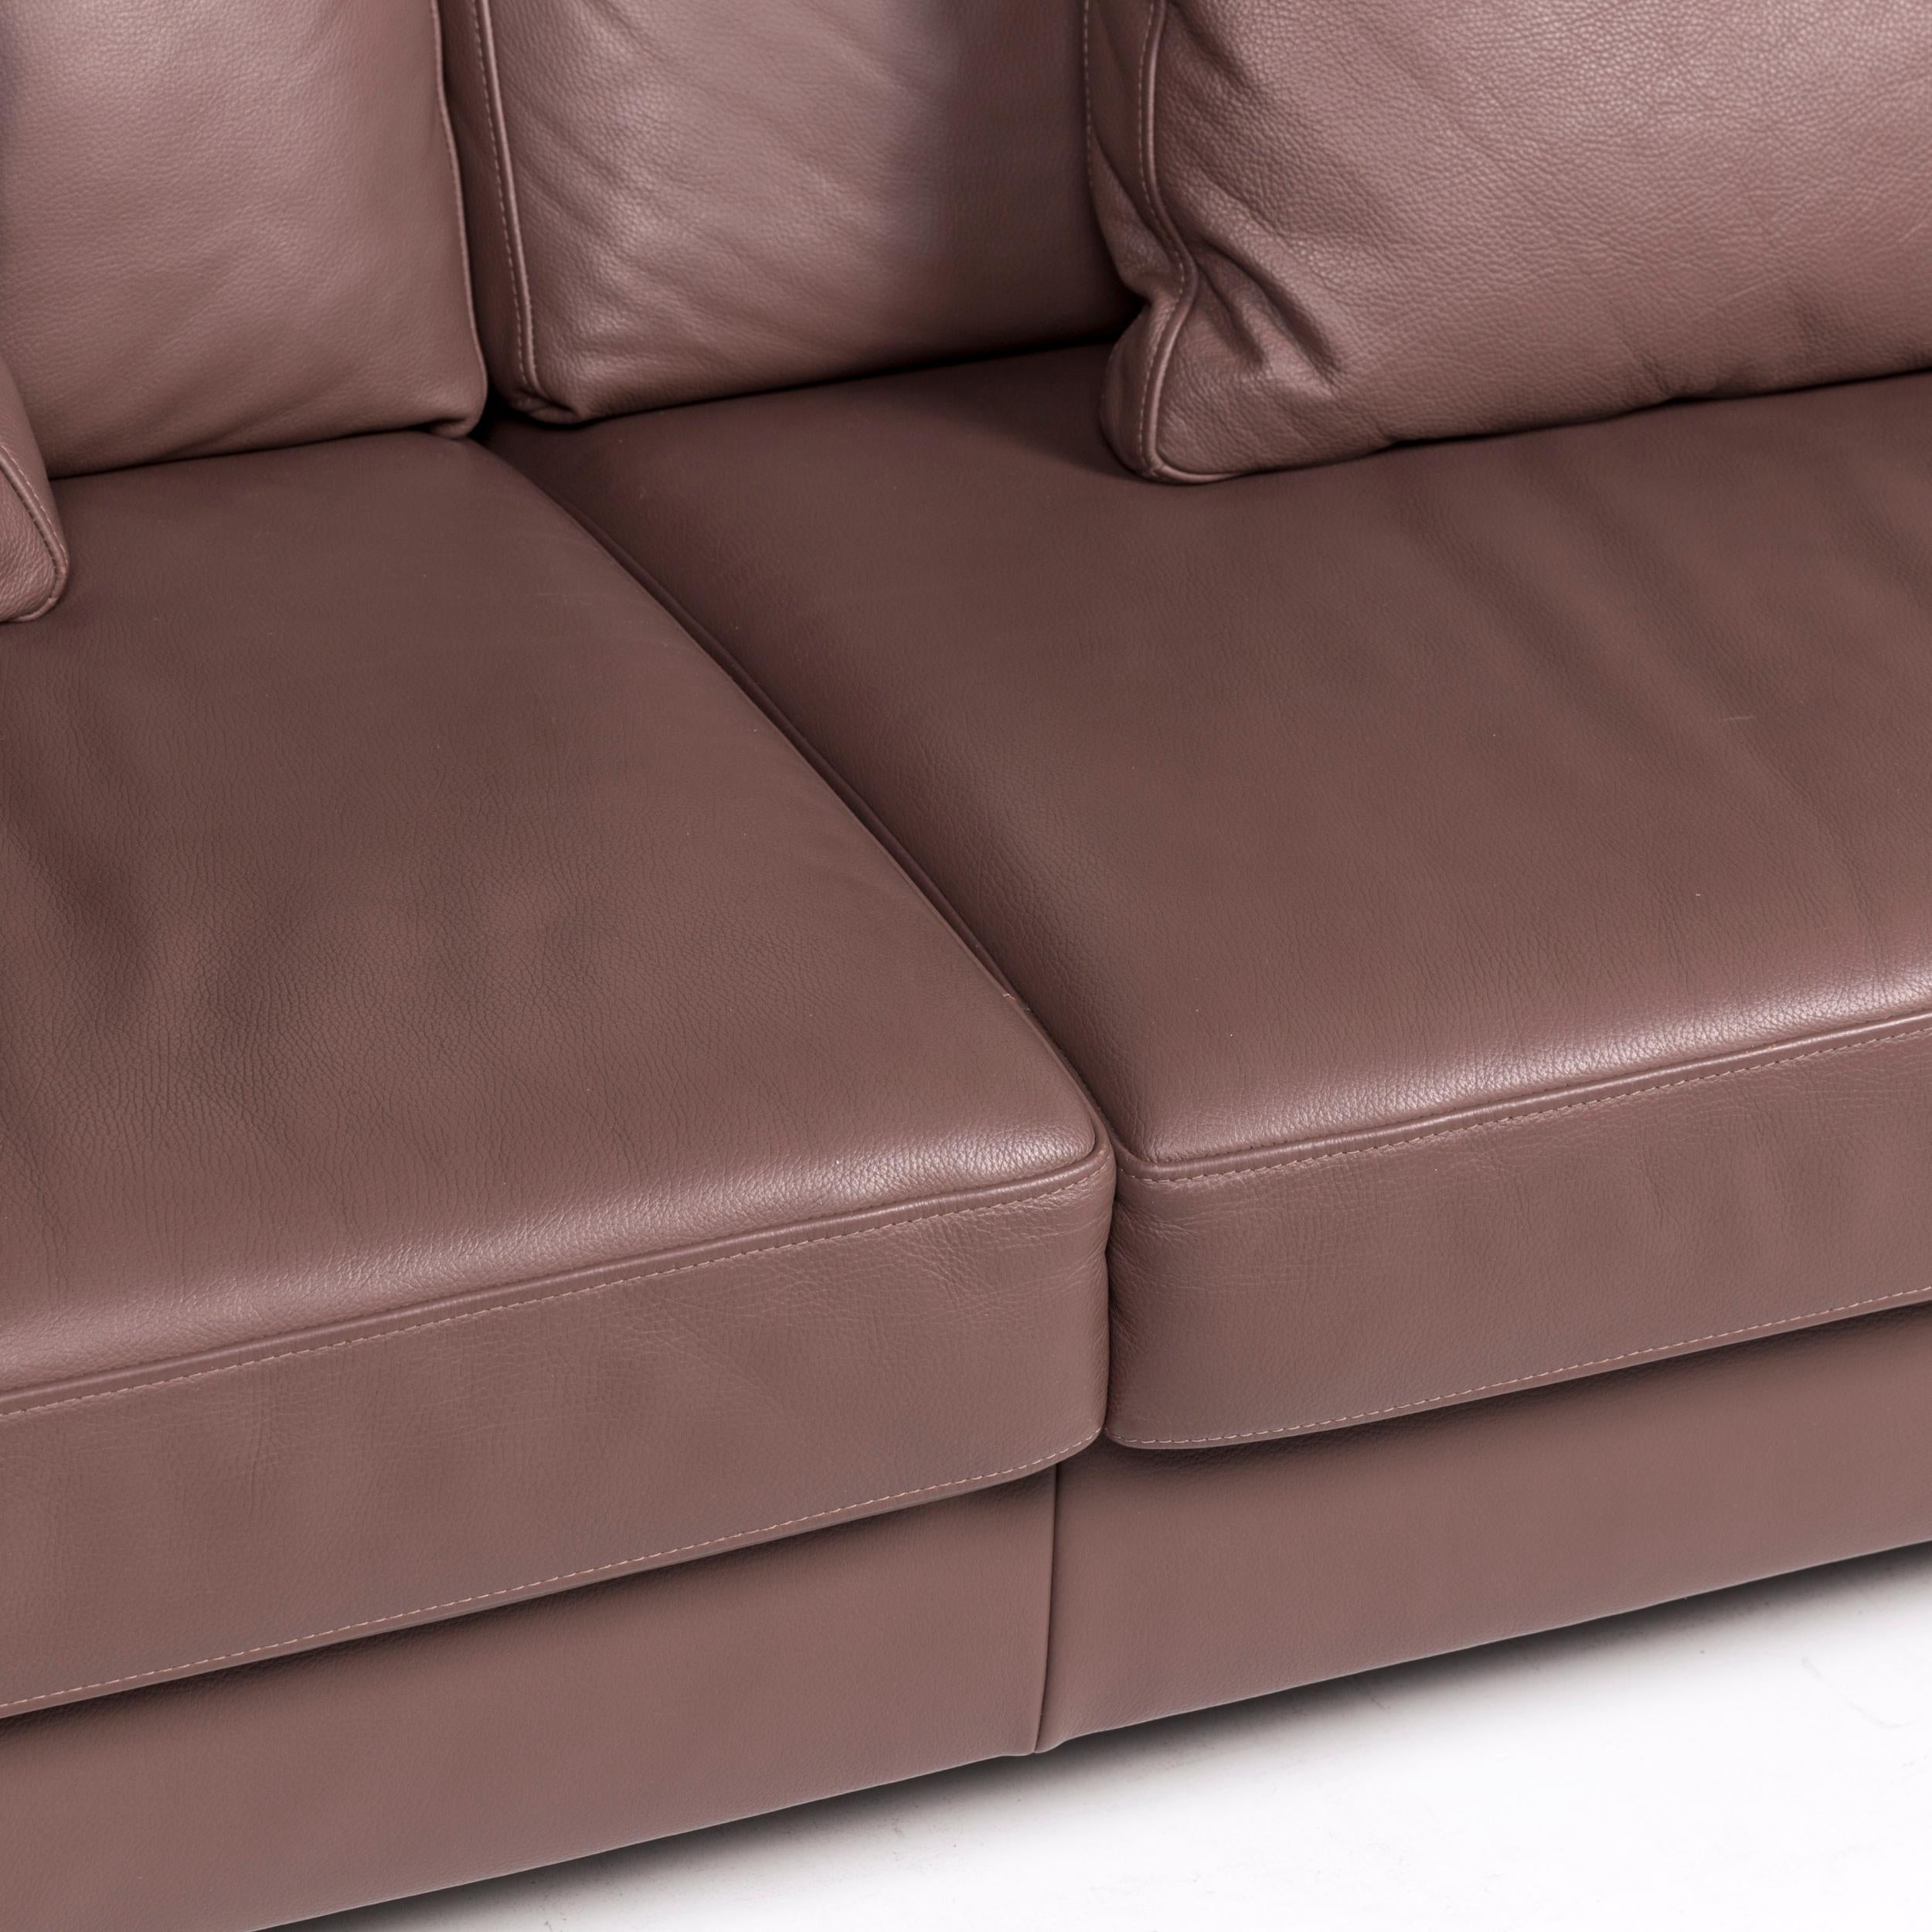 We bring to you an Ewald Schillig leather sofa brown three-seat couch.

 

 Product measurements in centimeters:
 

Depth 90
Width 205
Height 78
Seat-height 42
Rest-height 54
Seat-depth 56
Seat-width 178
Back-height 36.